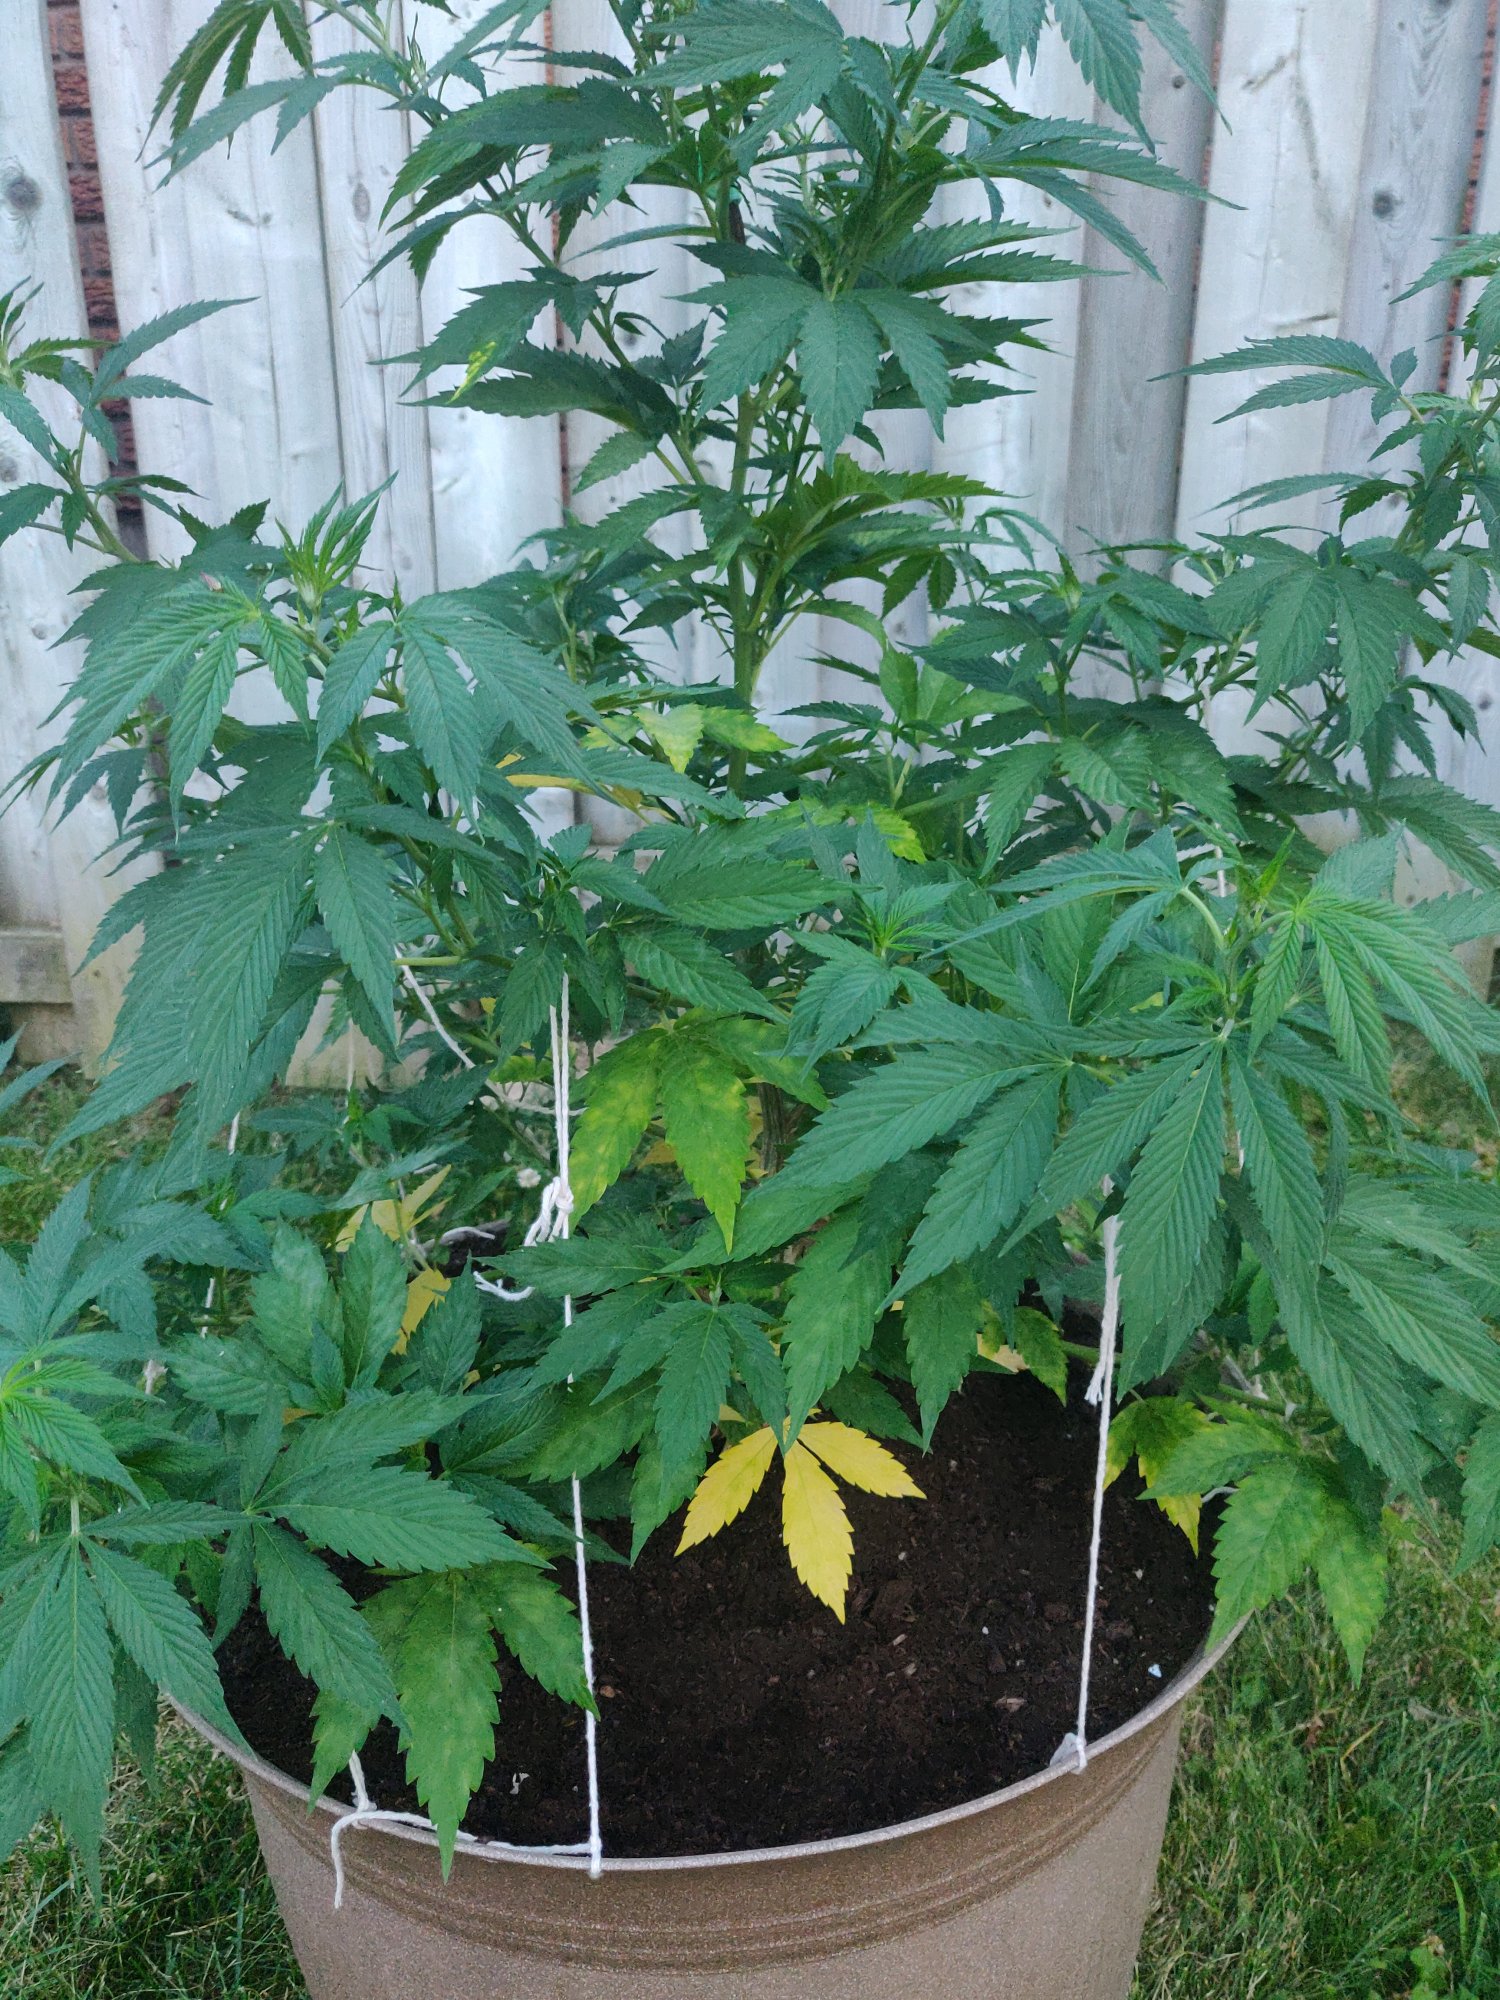 Leaves yellowing 3